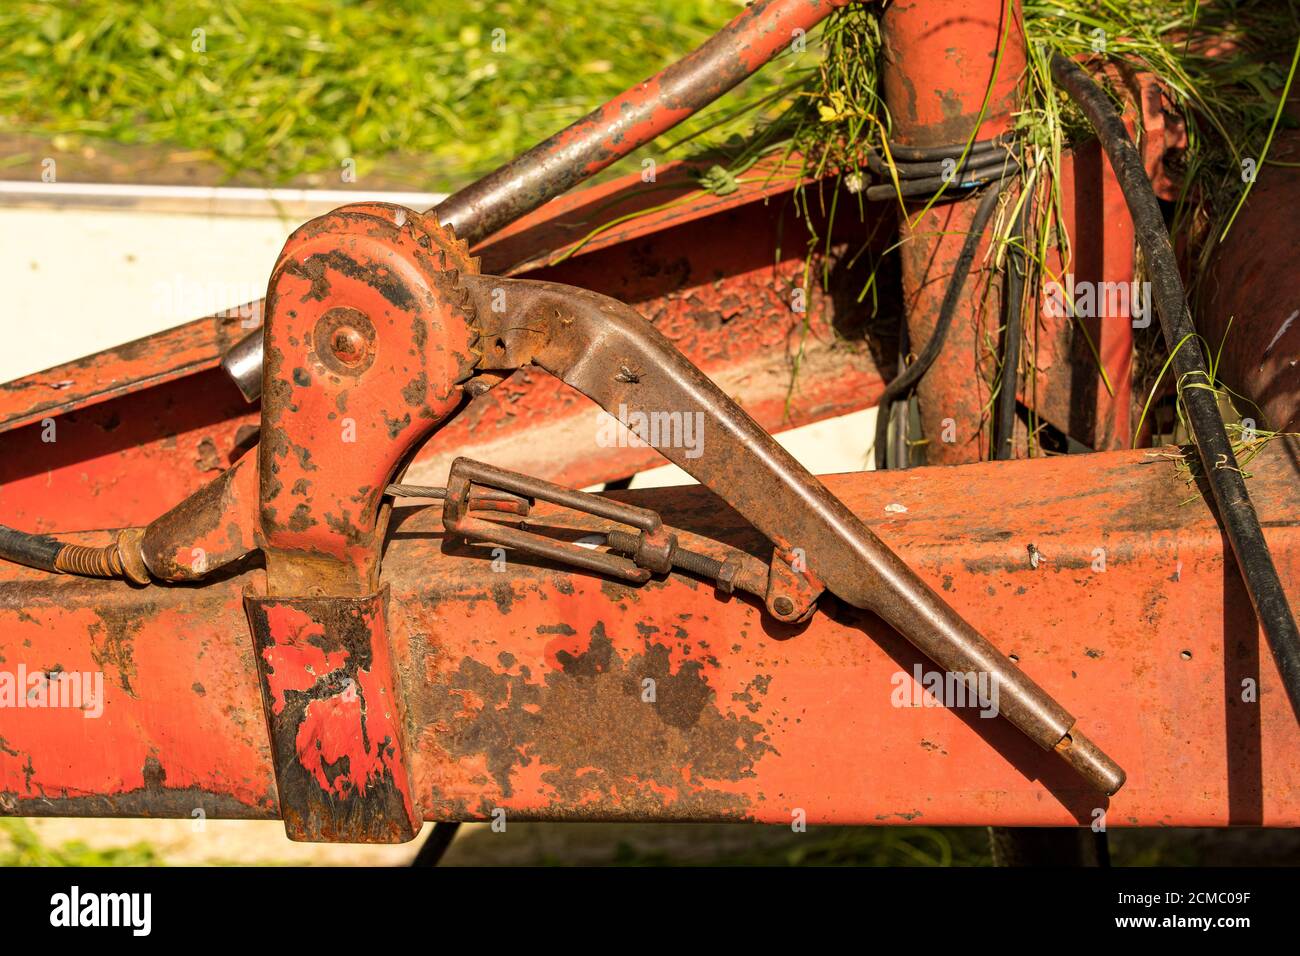 Gear change of an old red tractor Stock Photo